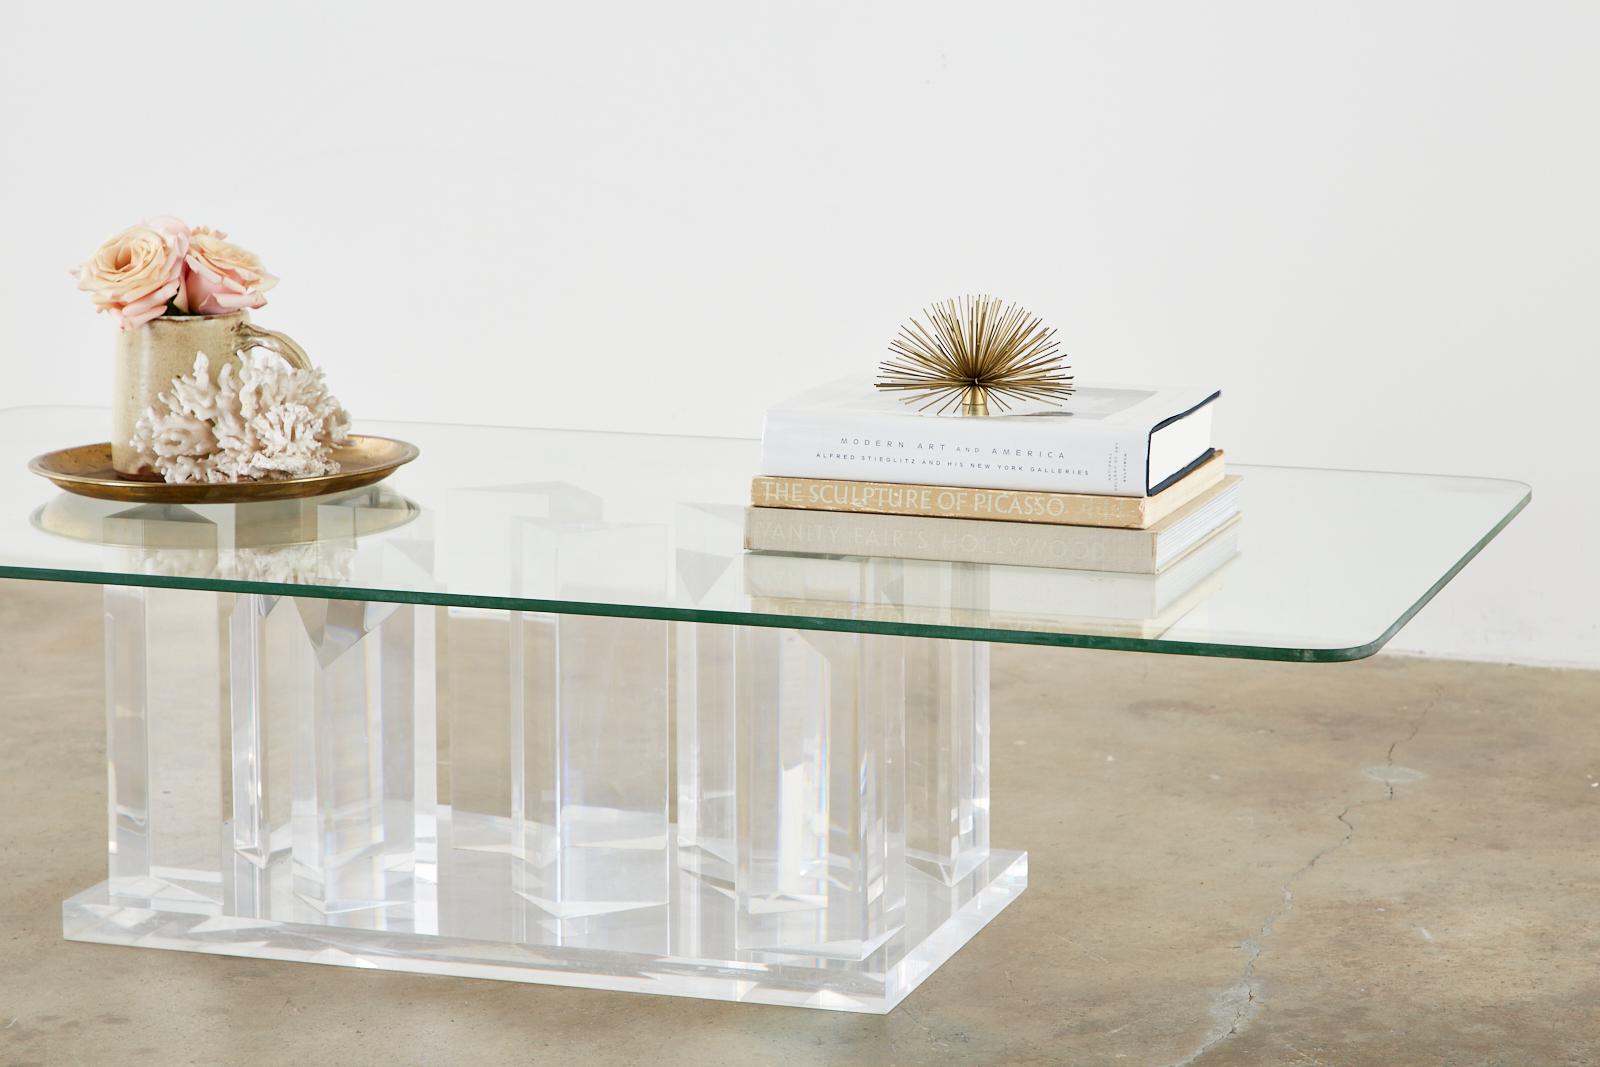 Fantastic Hollywood Regency coffee or cocktail table. Featuring a sculptural lucite base with facet cut stalagmite shape forms. The large rectangular pane of glass rests upon a bed of angular shapes that reflect and play with the reflections of